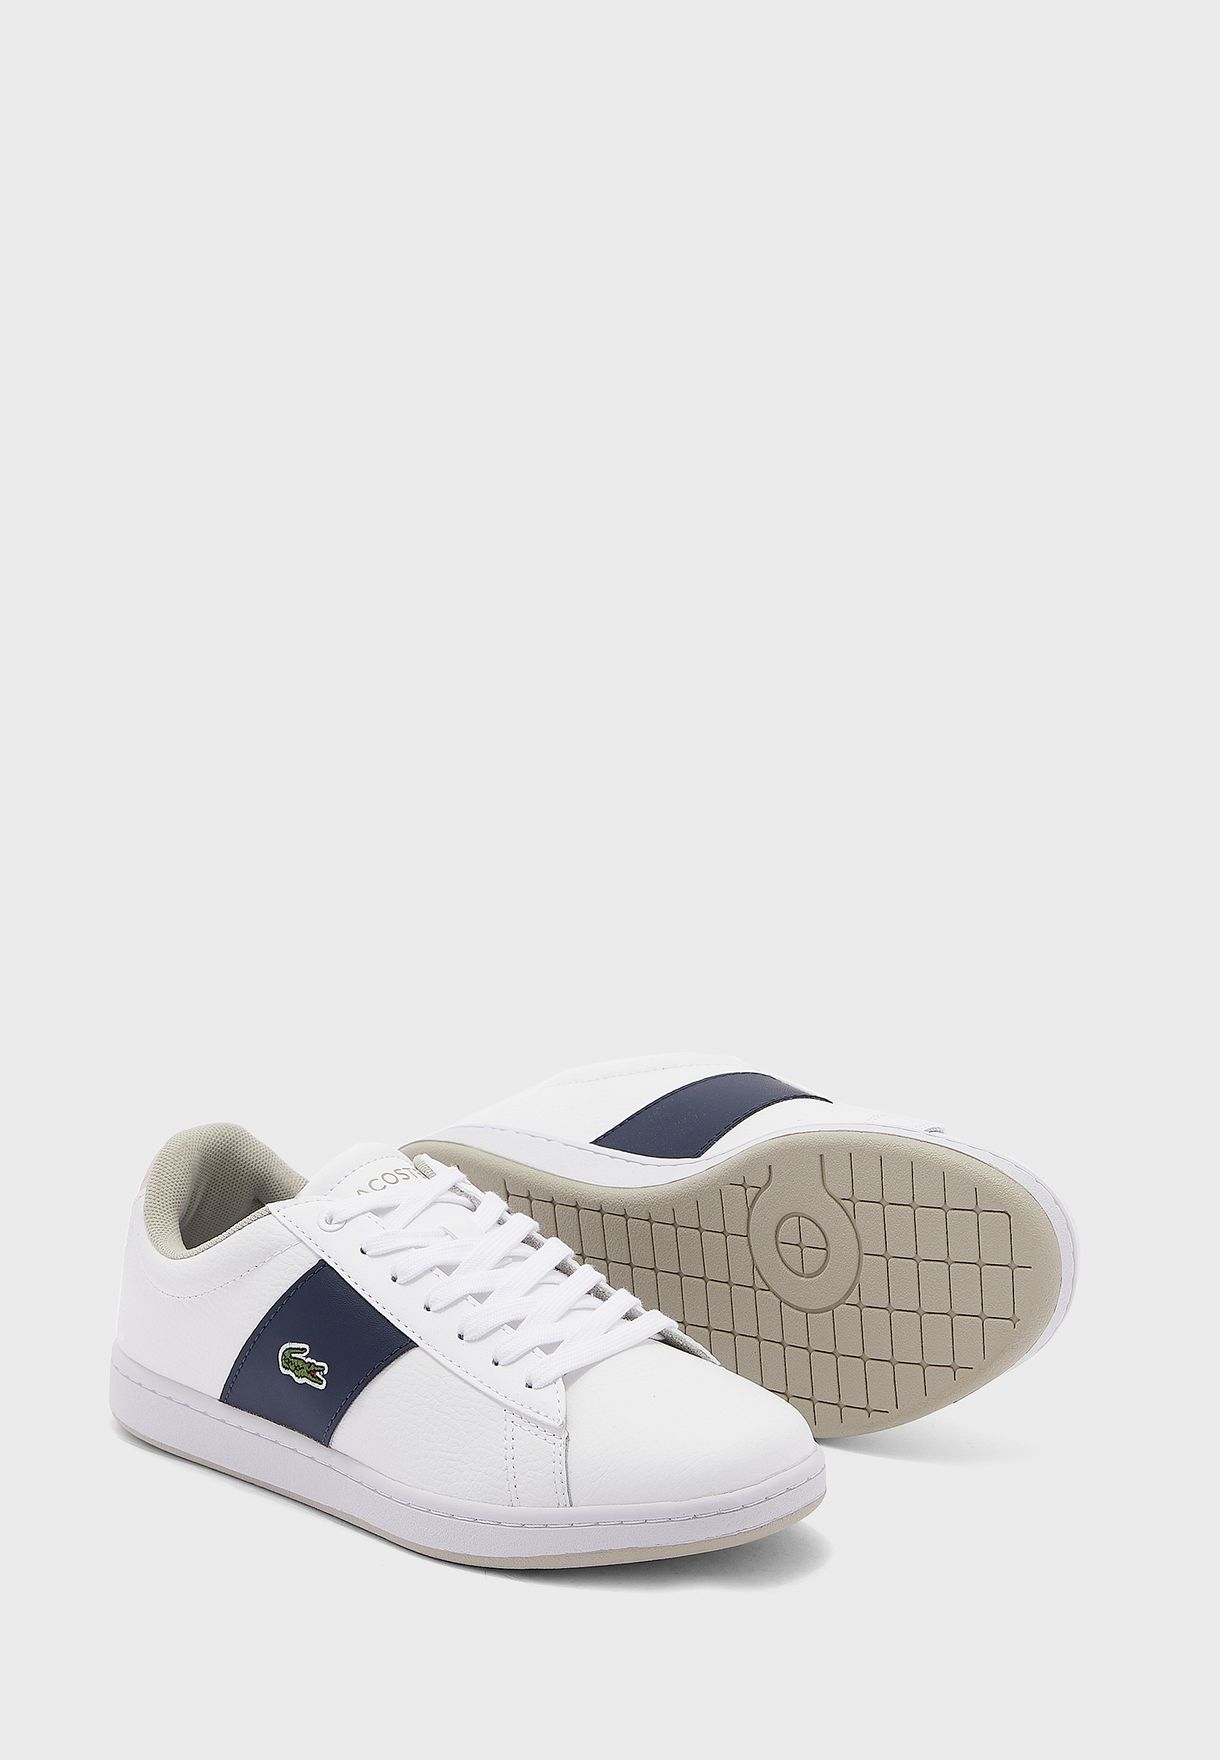 Carnaby Evo Cgr 2221 Sneakers